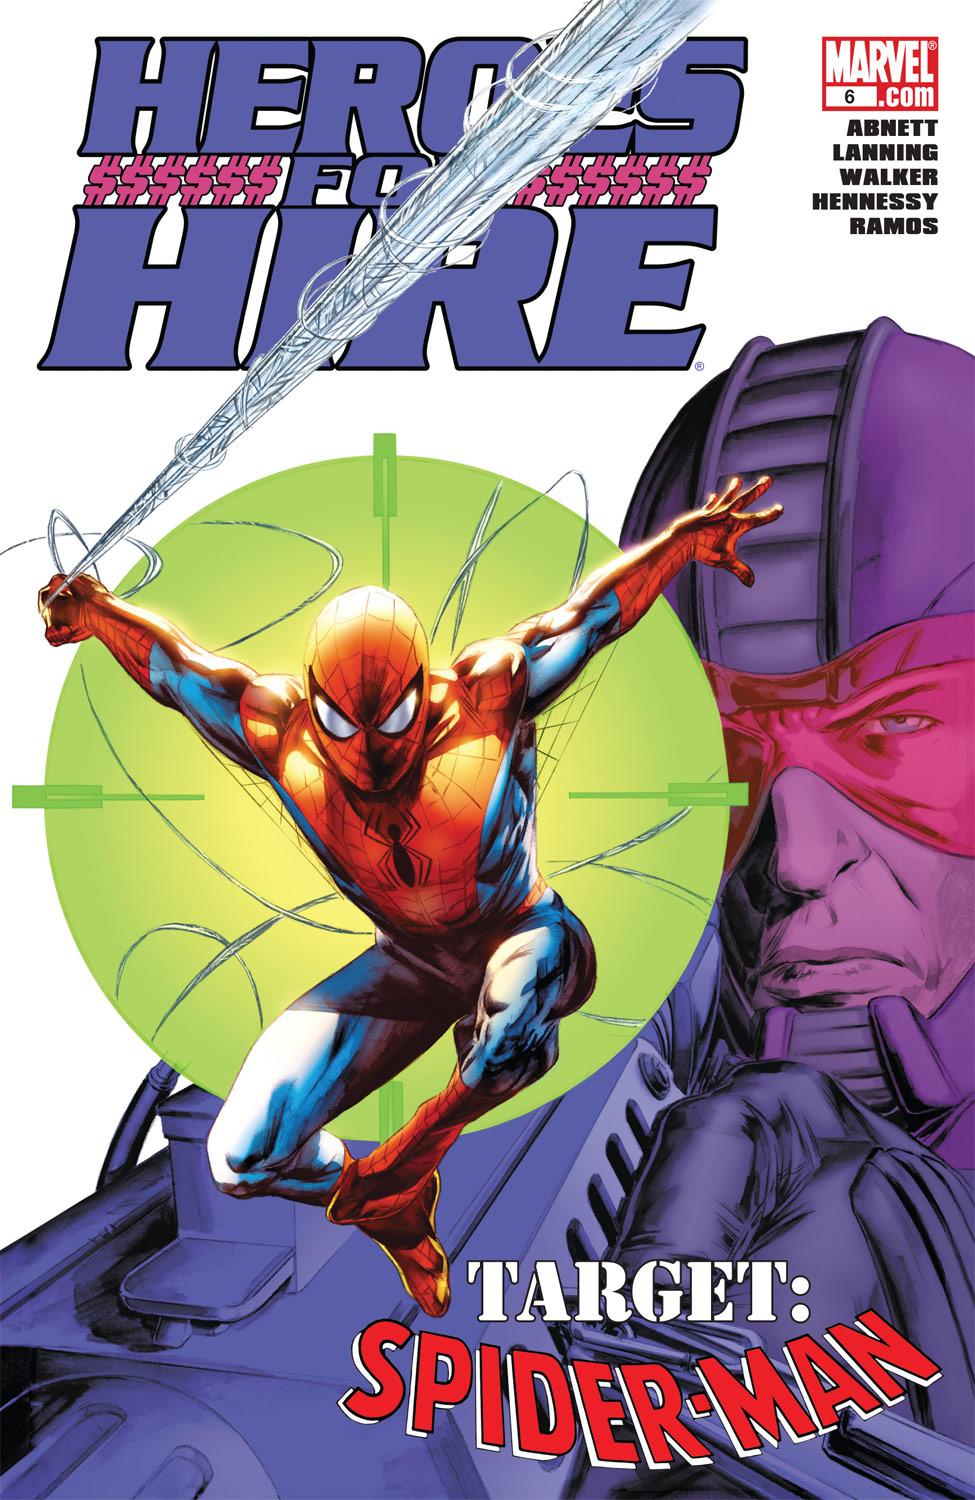 Heroes for Hire (2010) #6